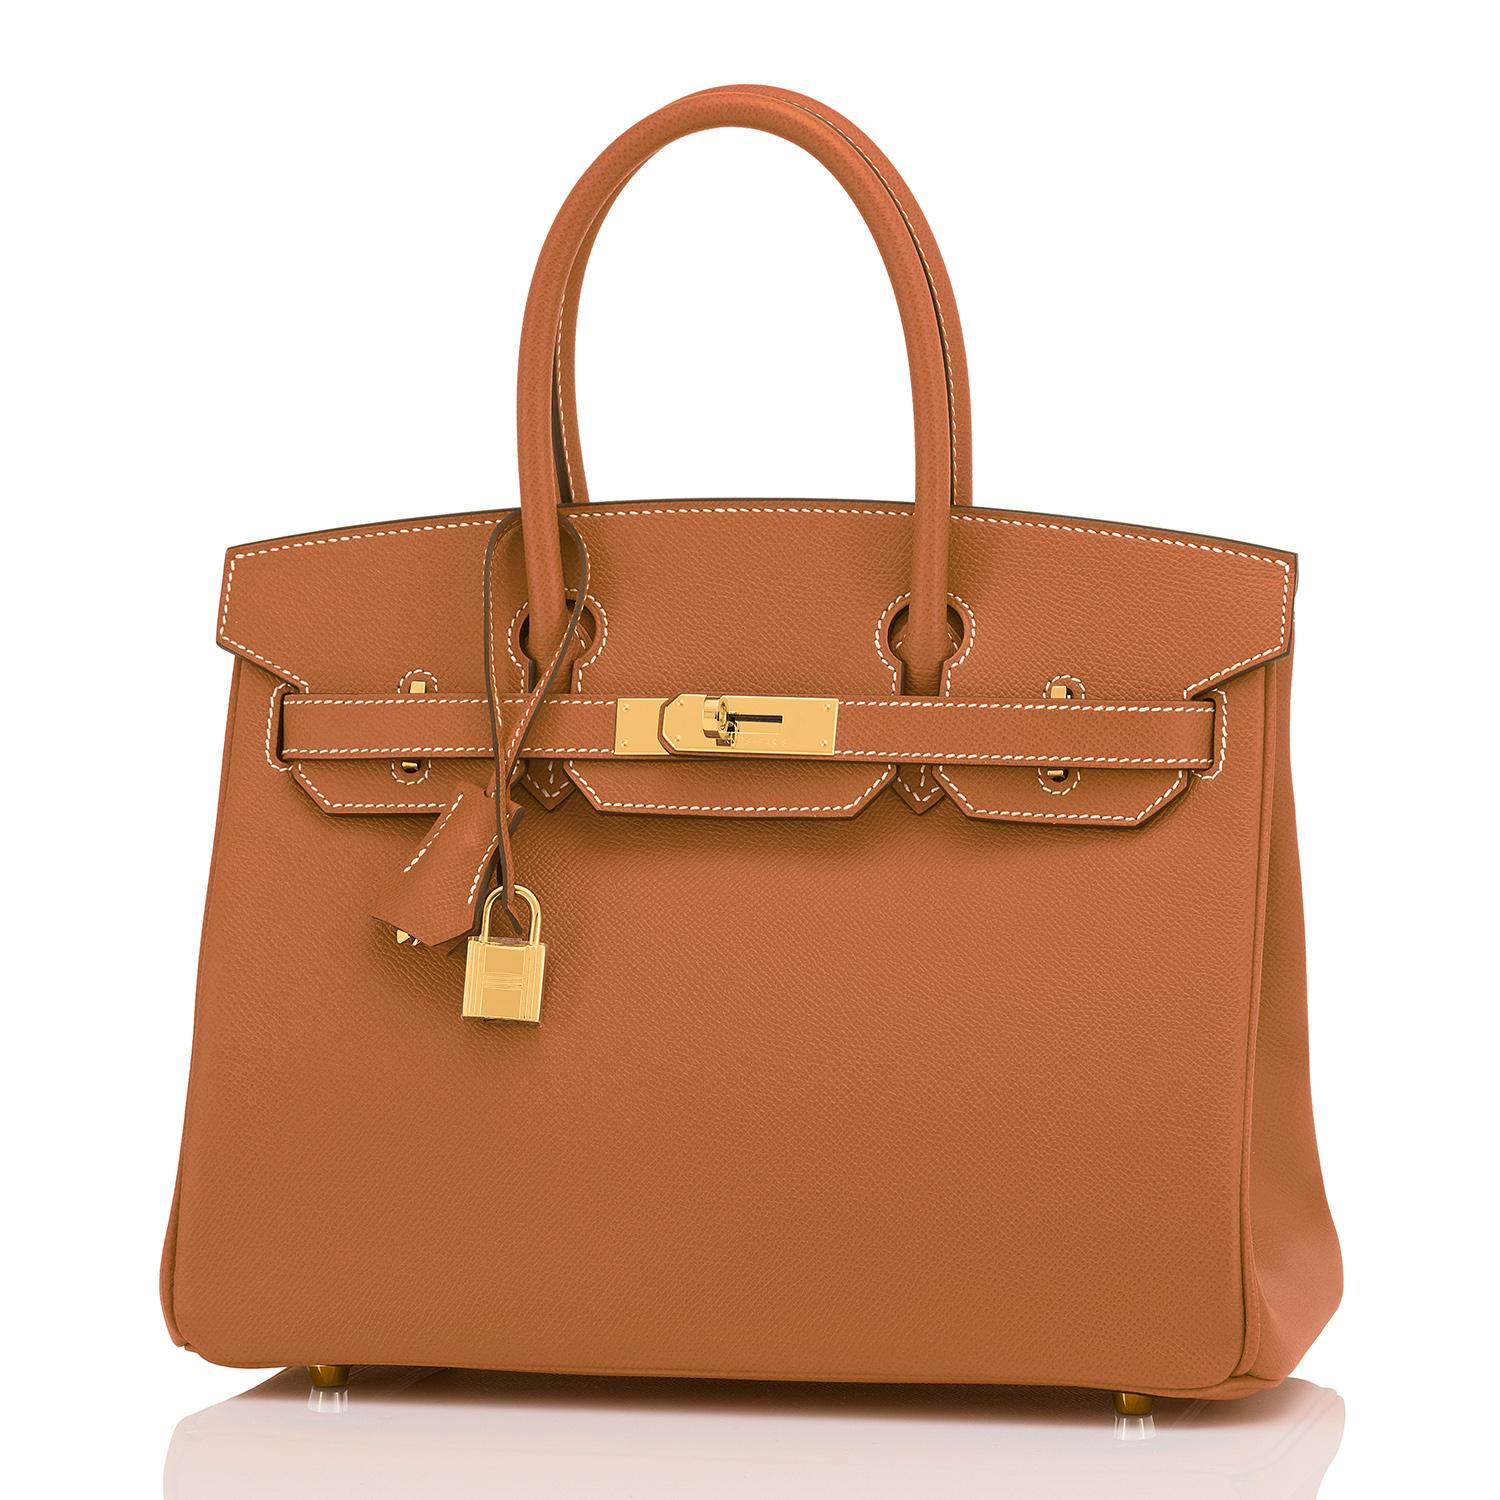 Hermes Gold Camel Tan 30cm Birkin Gold Hardware NEW Store Fresh
Brand New in Box. Store Fresh. Pristine Condition (with plastic on hardware). 
Perfect gift! Comes with lock, keys, clochette, sleeper, raincoat, and Hermes box.
Make a statement